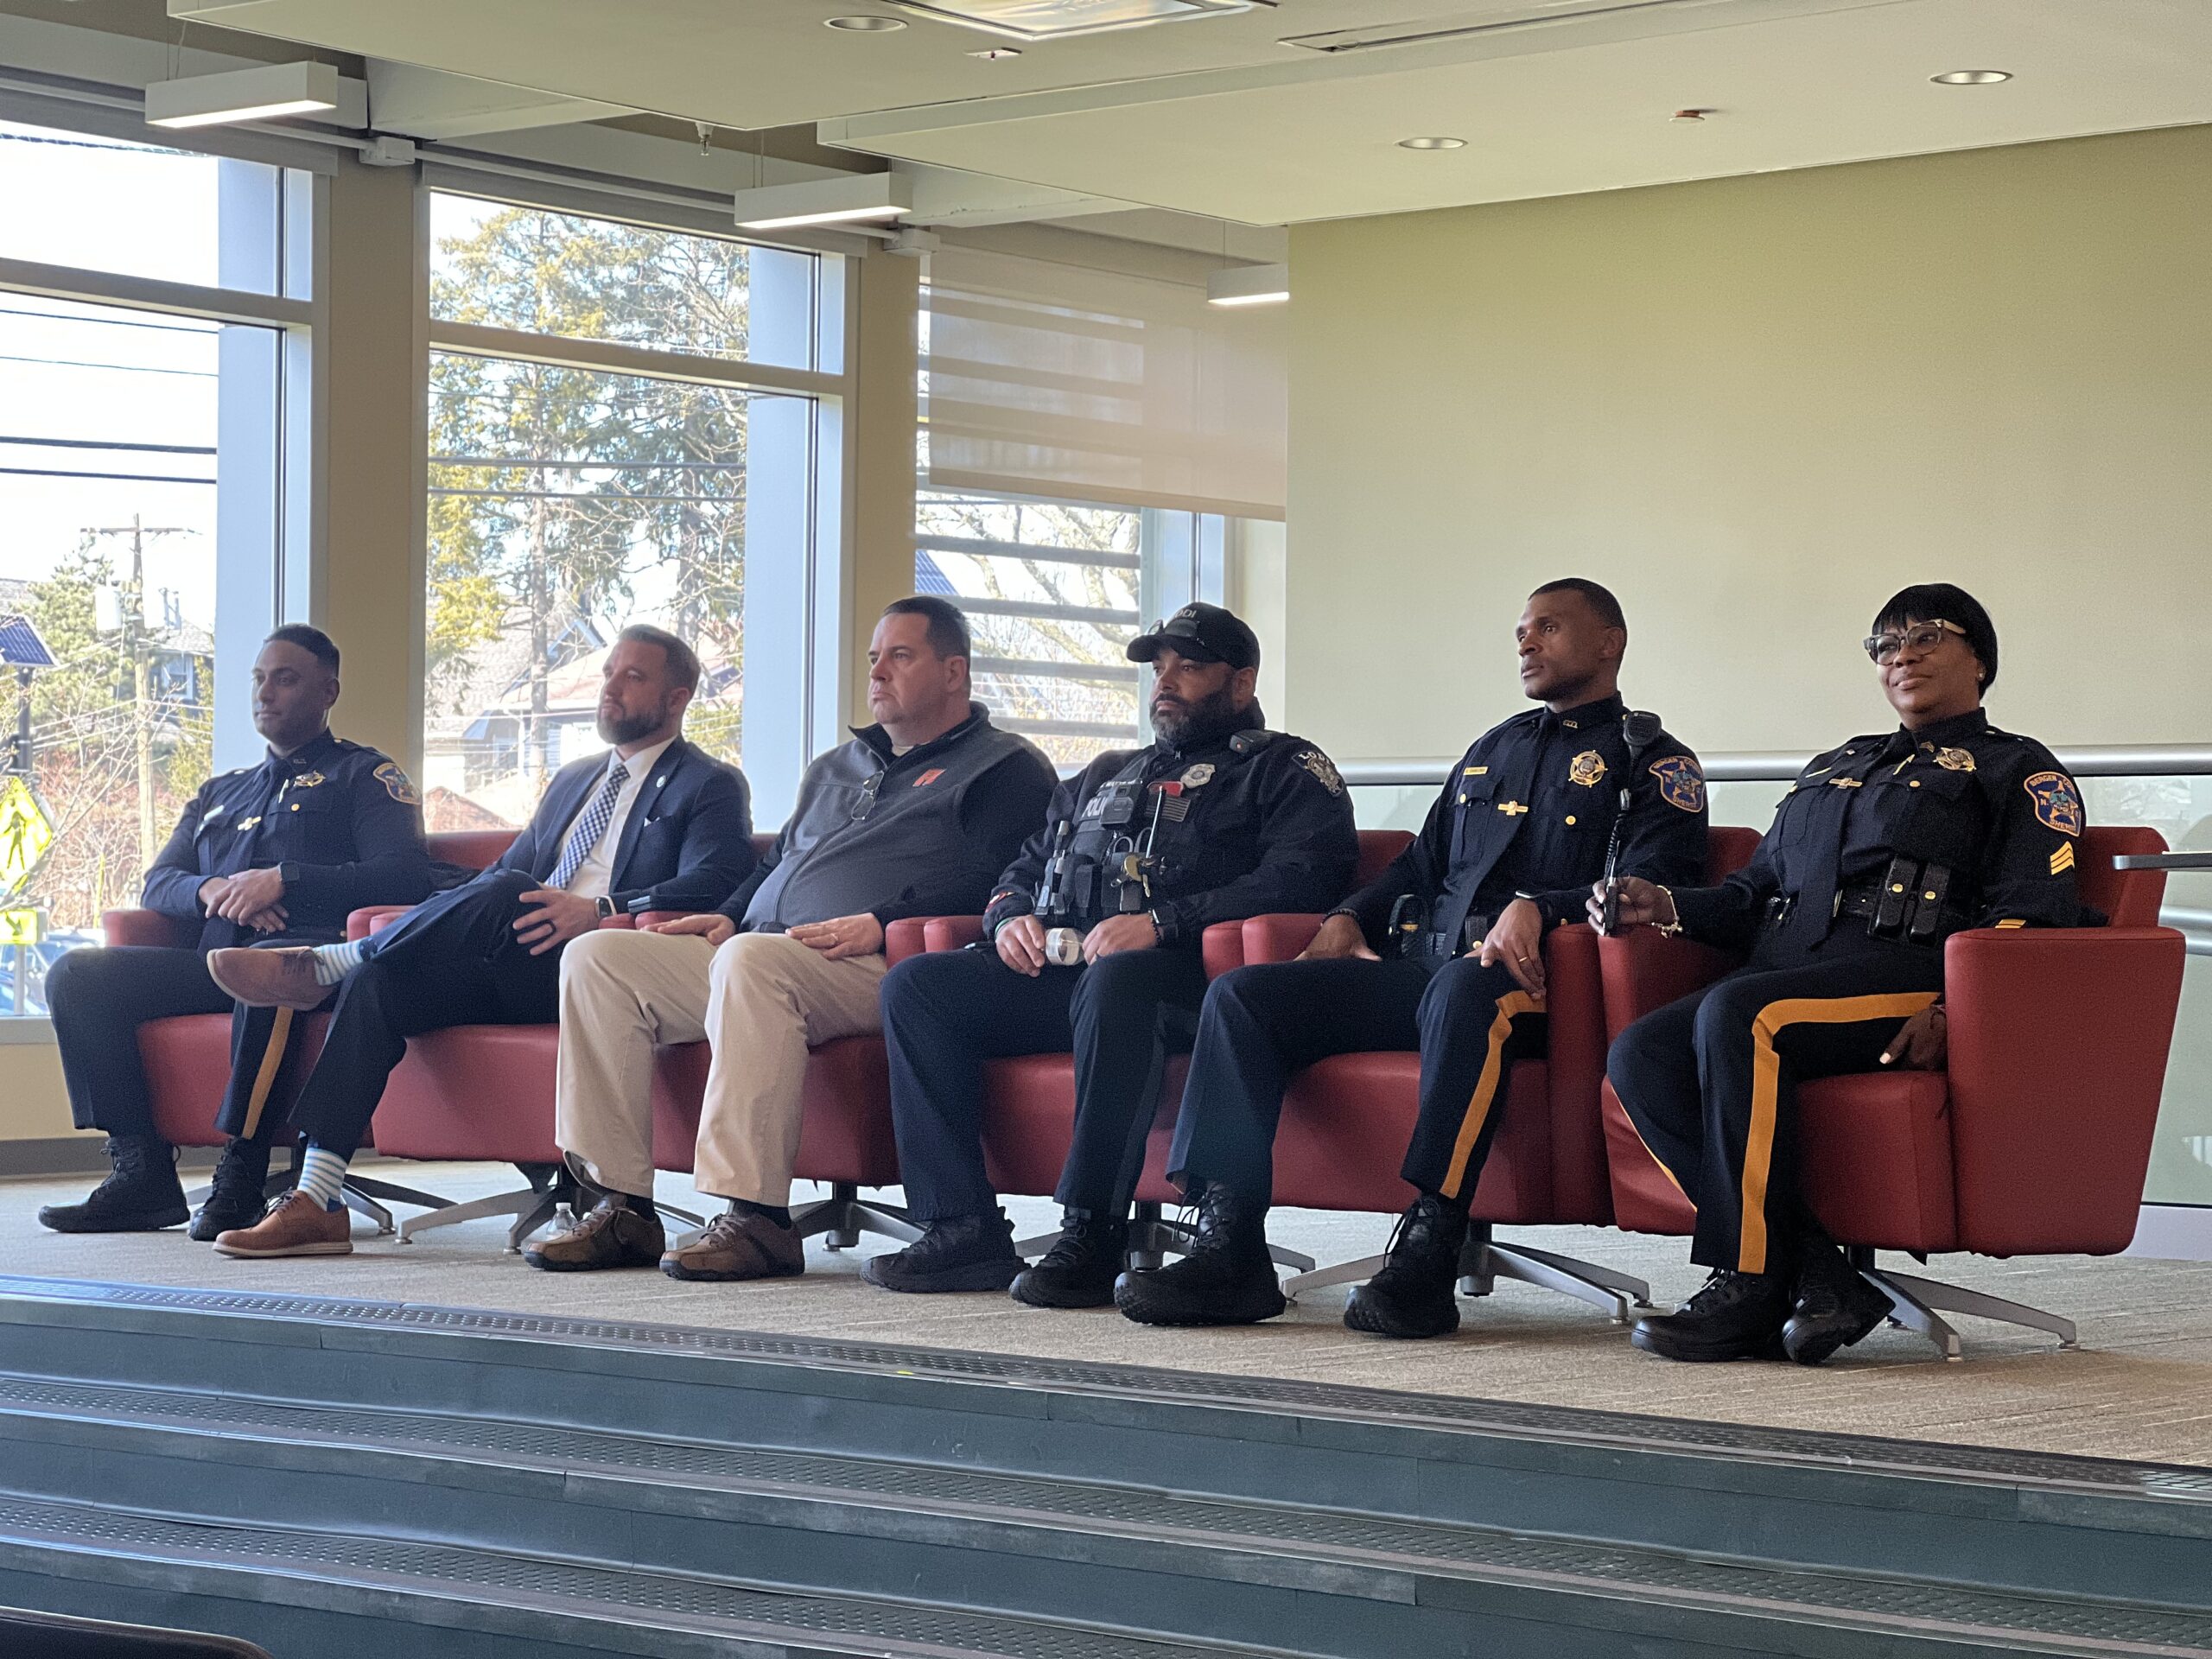 Left to right: Officer Litty Thomas (BCSO), Lt. Kelly Krenn (BCPO), Captain Ed Young (Fort Lee PD), Officer Keith Watts (Lodi PD), Officer Ken Charlenea (BCSO), and Sergeant Nichelle Ponder (BCSO)